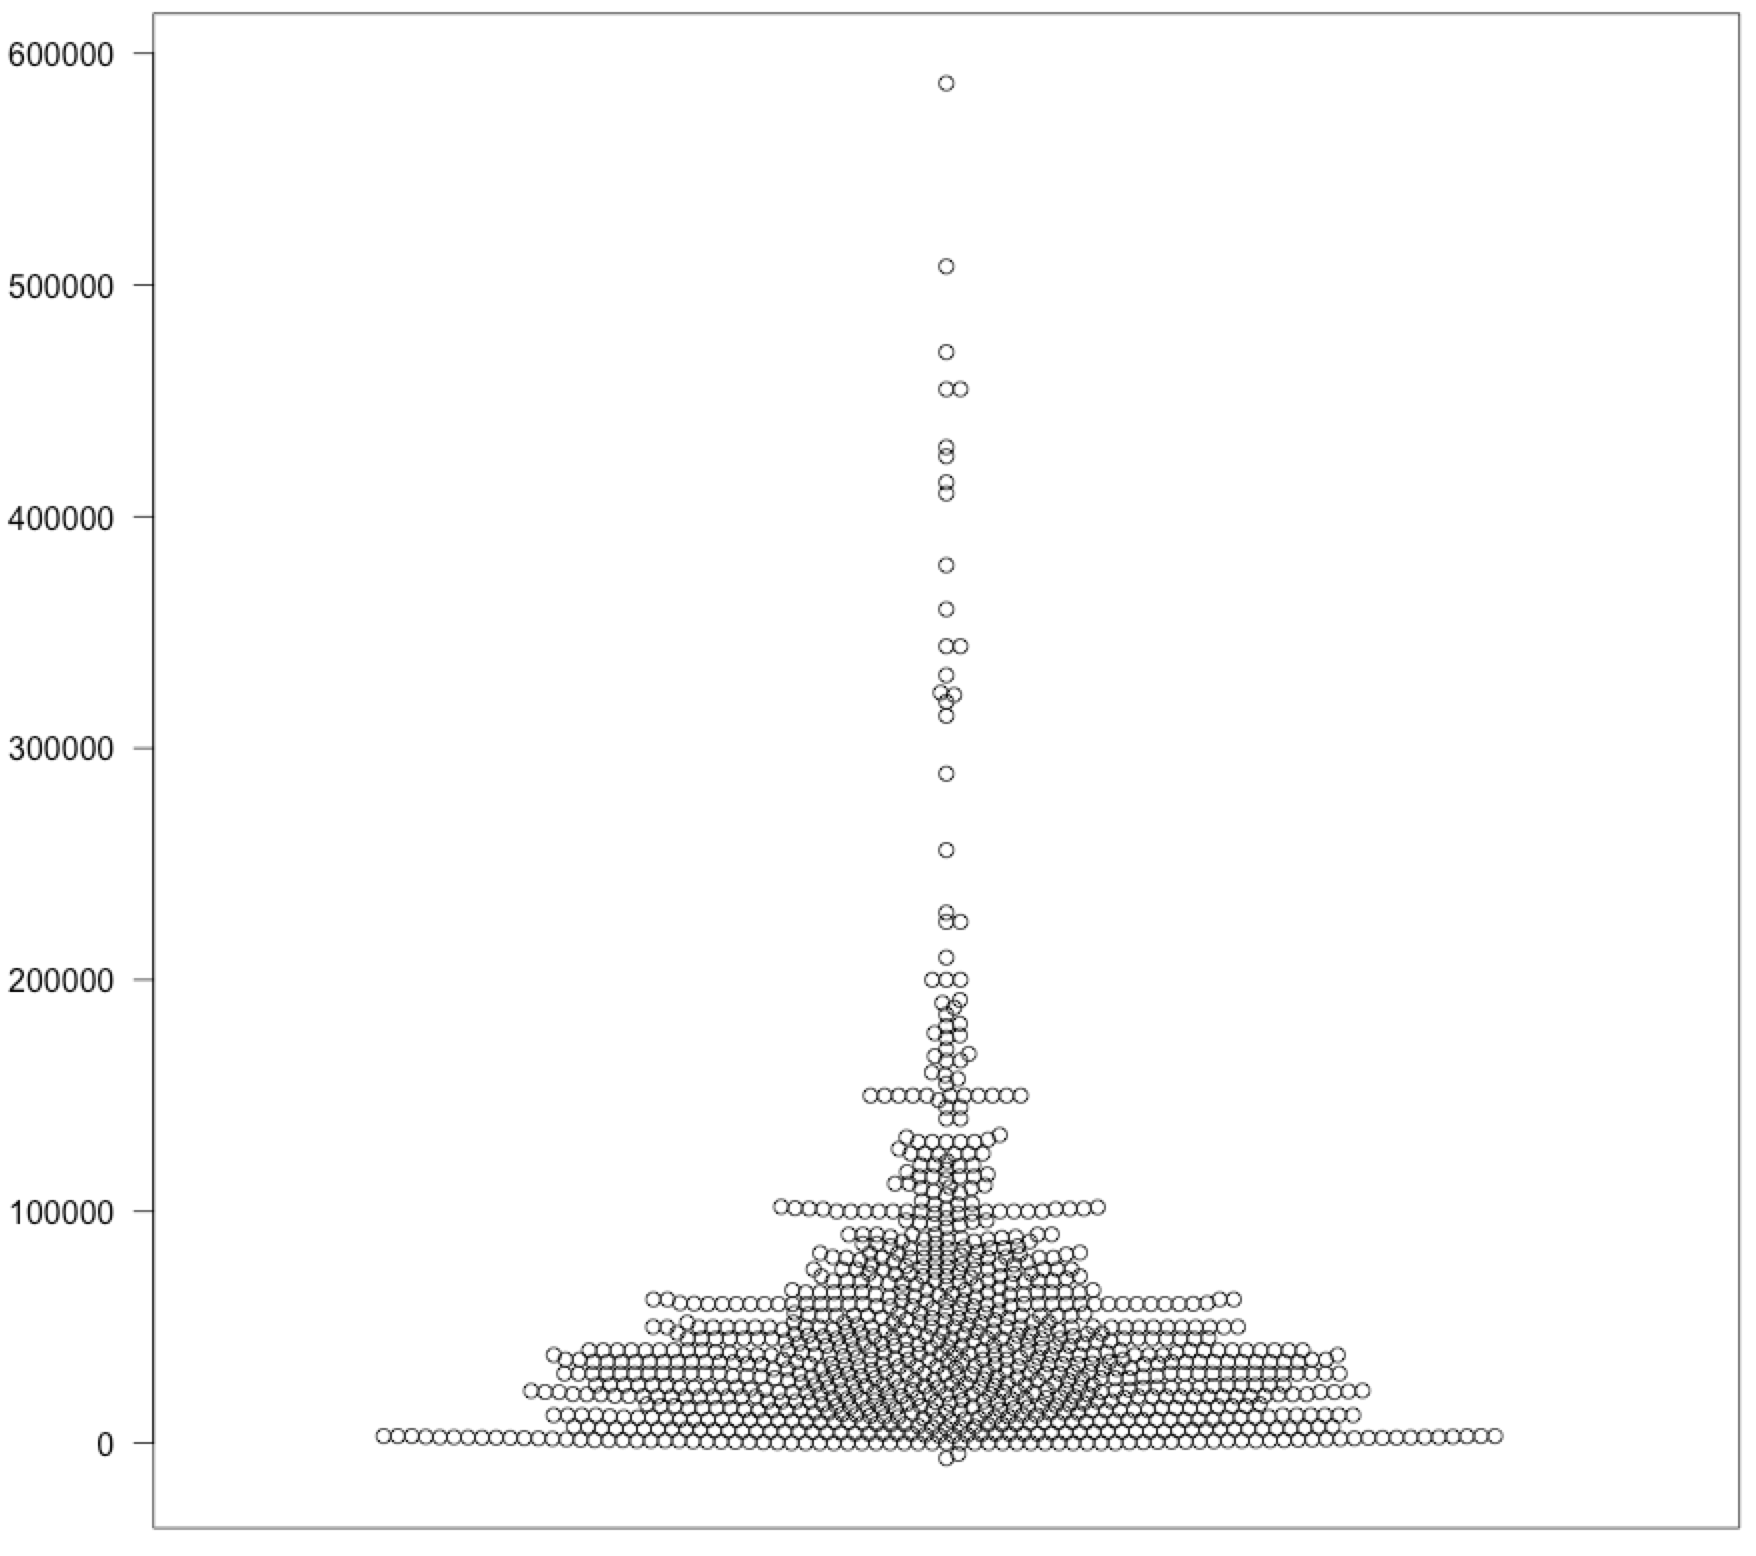 how-to-make-beeswarm-plots-in-r-to-show-distributions-flowingdata